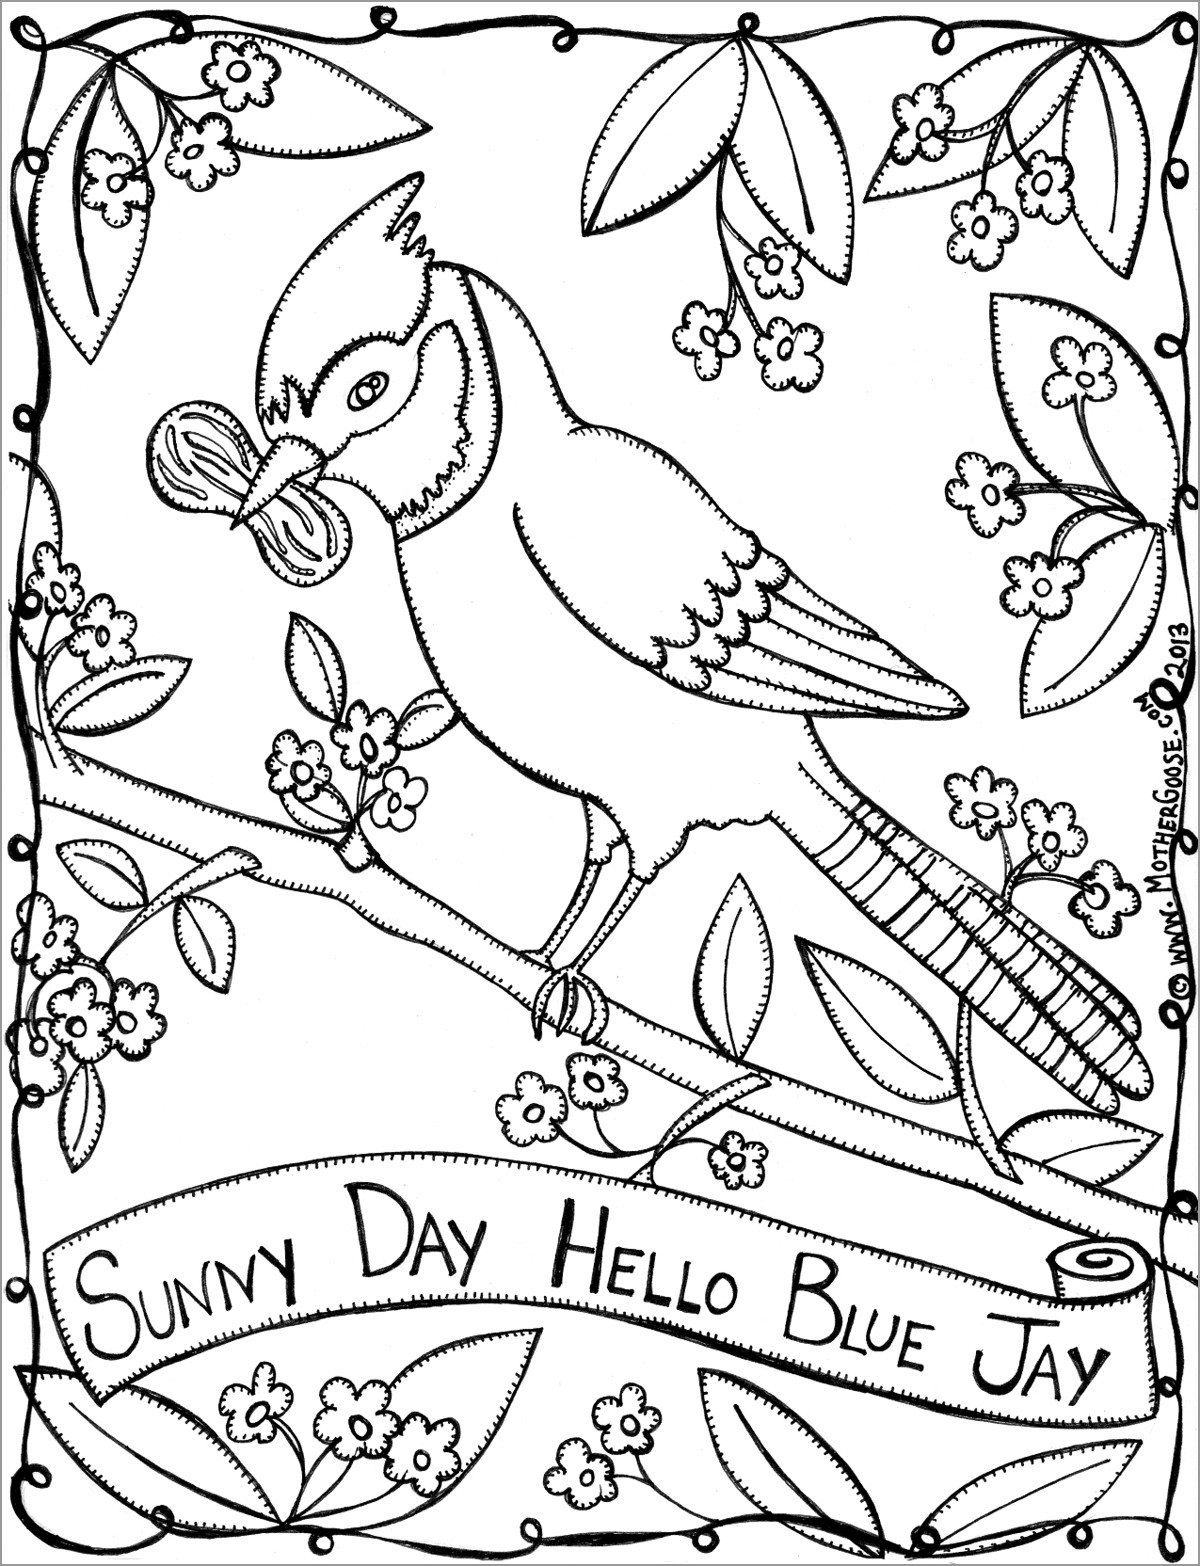 Blue Jay Coloring Page for Kids - ColoringBay